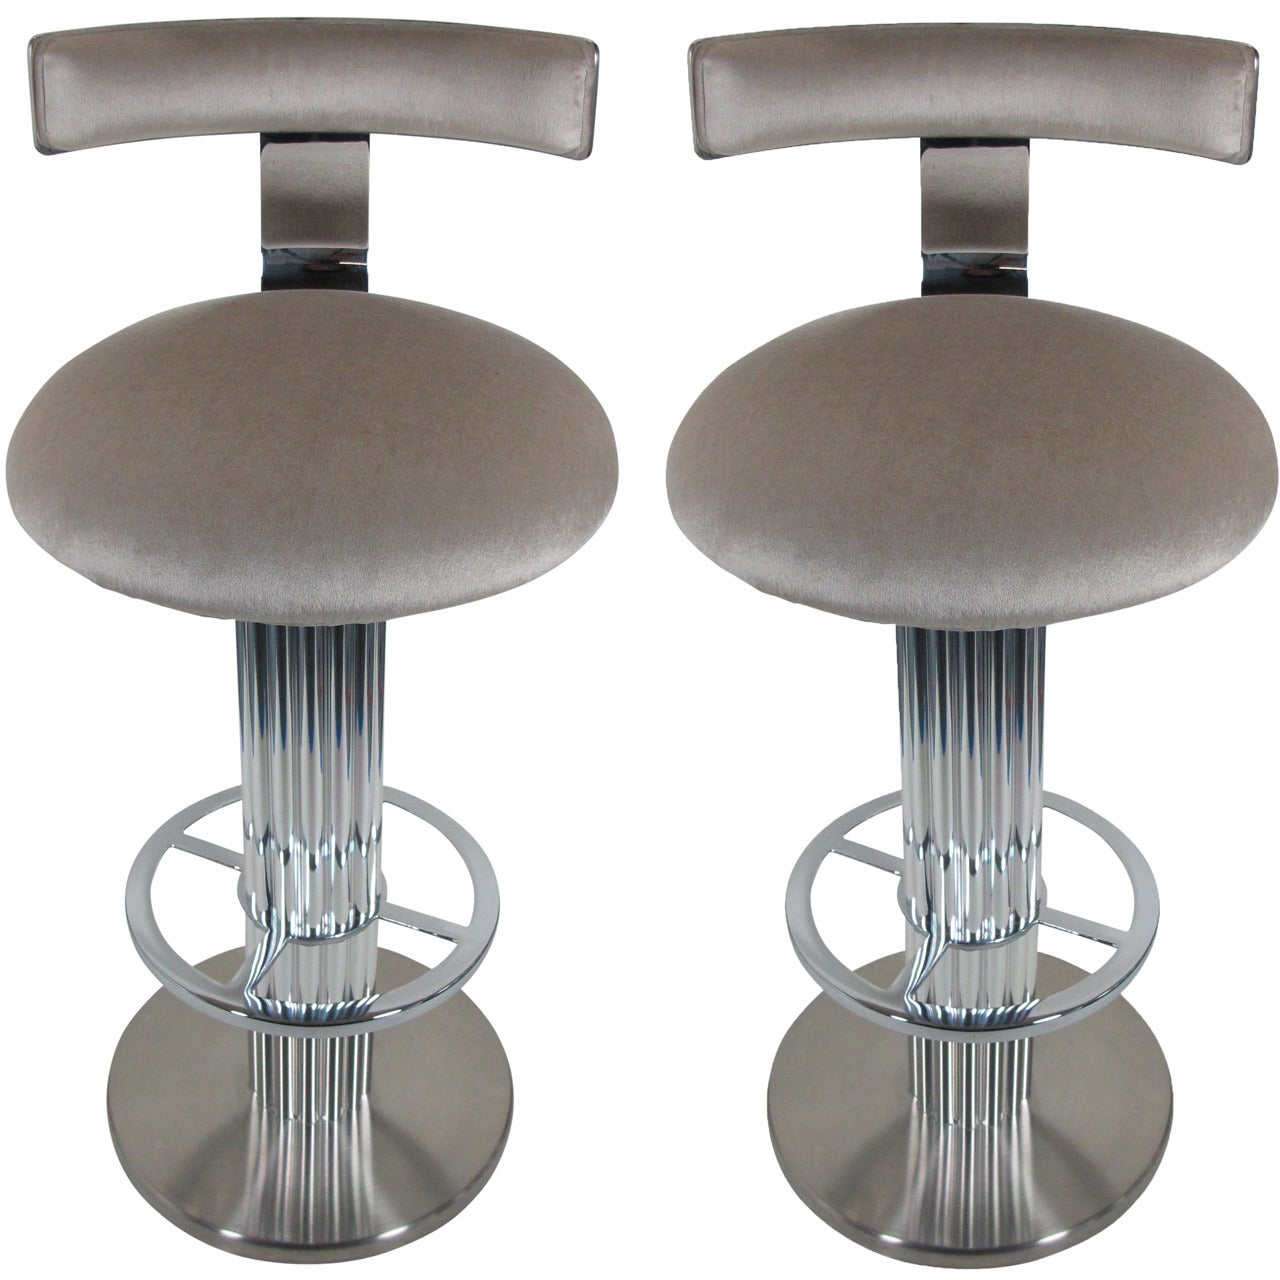 Pair of Reeded Column Swivel Bar Stools by Designs for Leisure